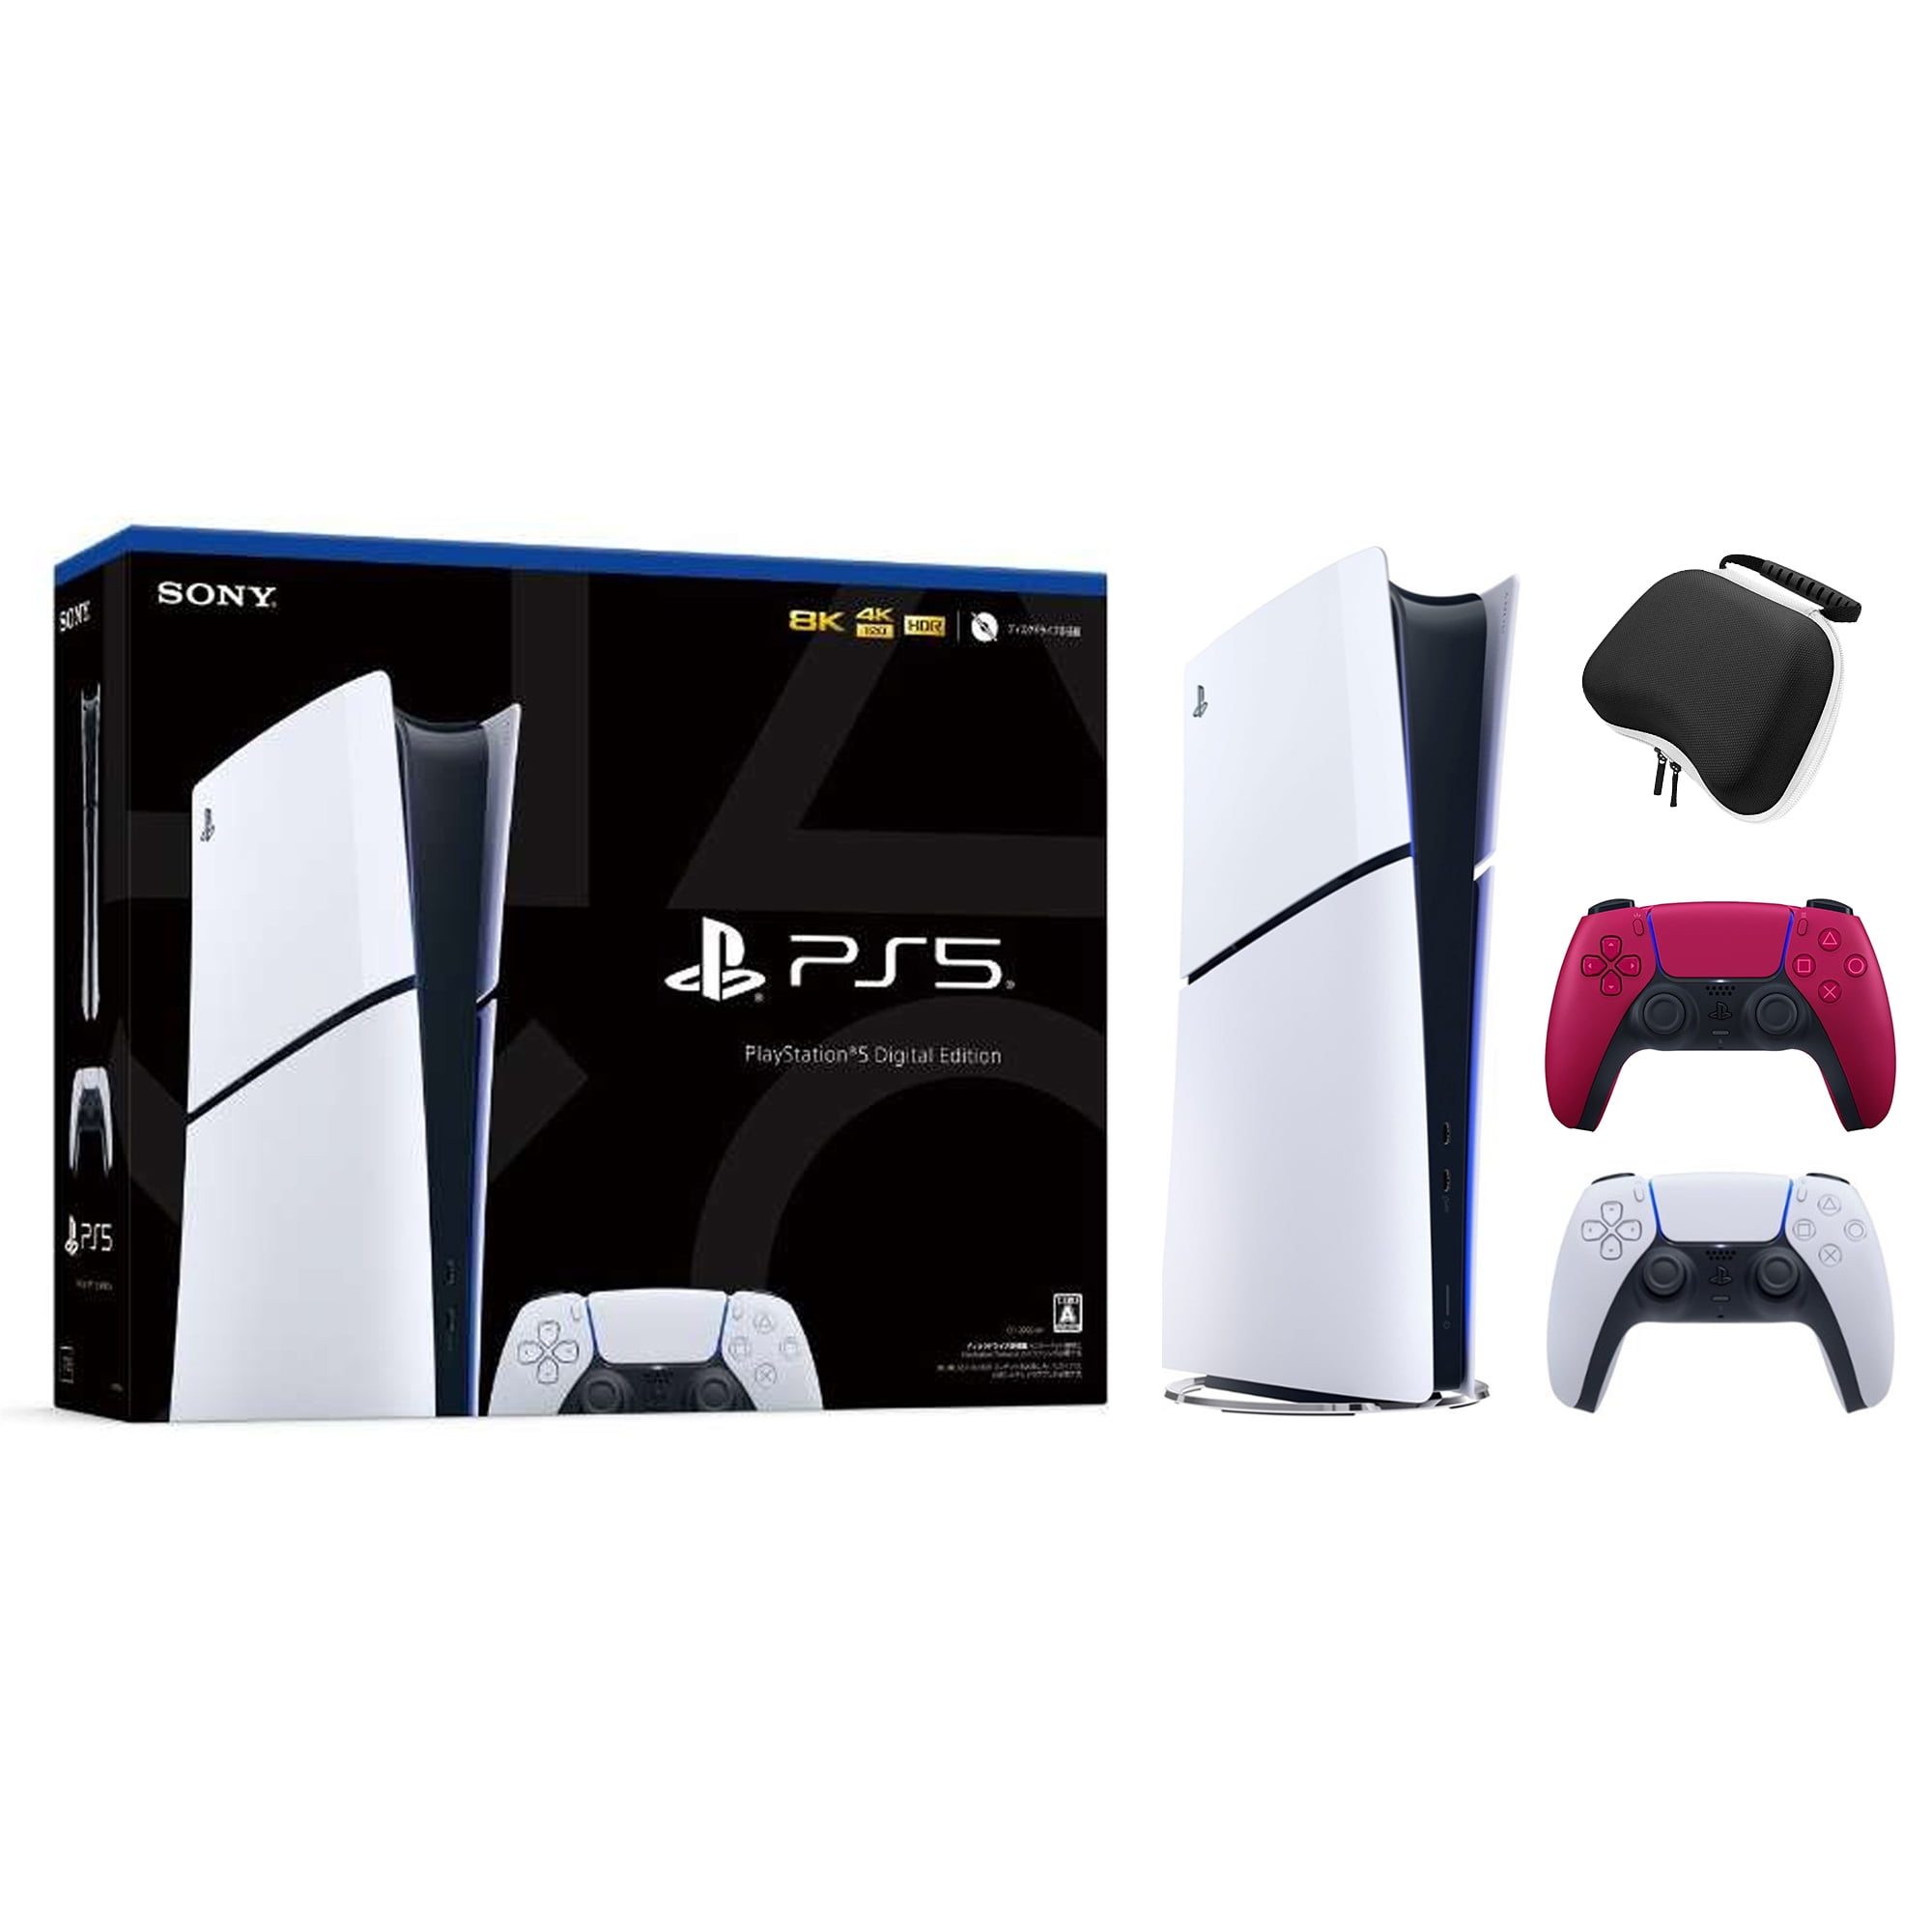 Sony PlayStation 5 Console (PS5 Digital Console) Digital Version w/ Nova  Pink Controller and Holder Mount Limited Edition Bundle 